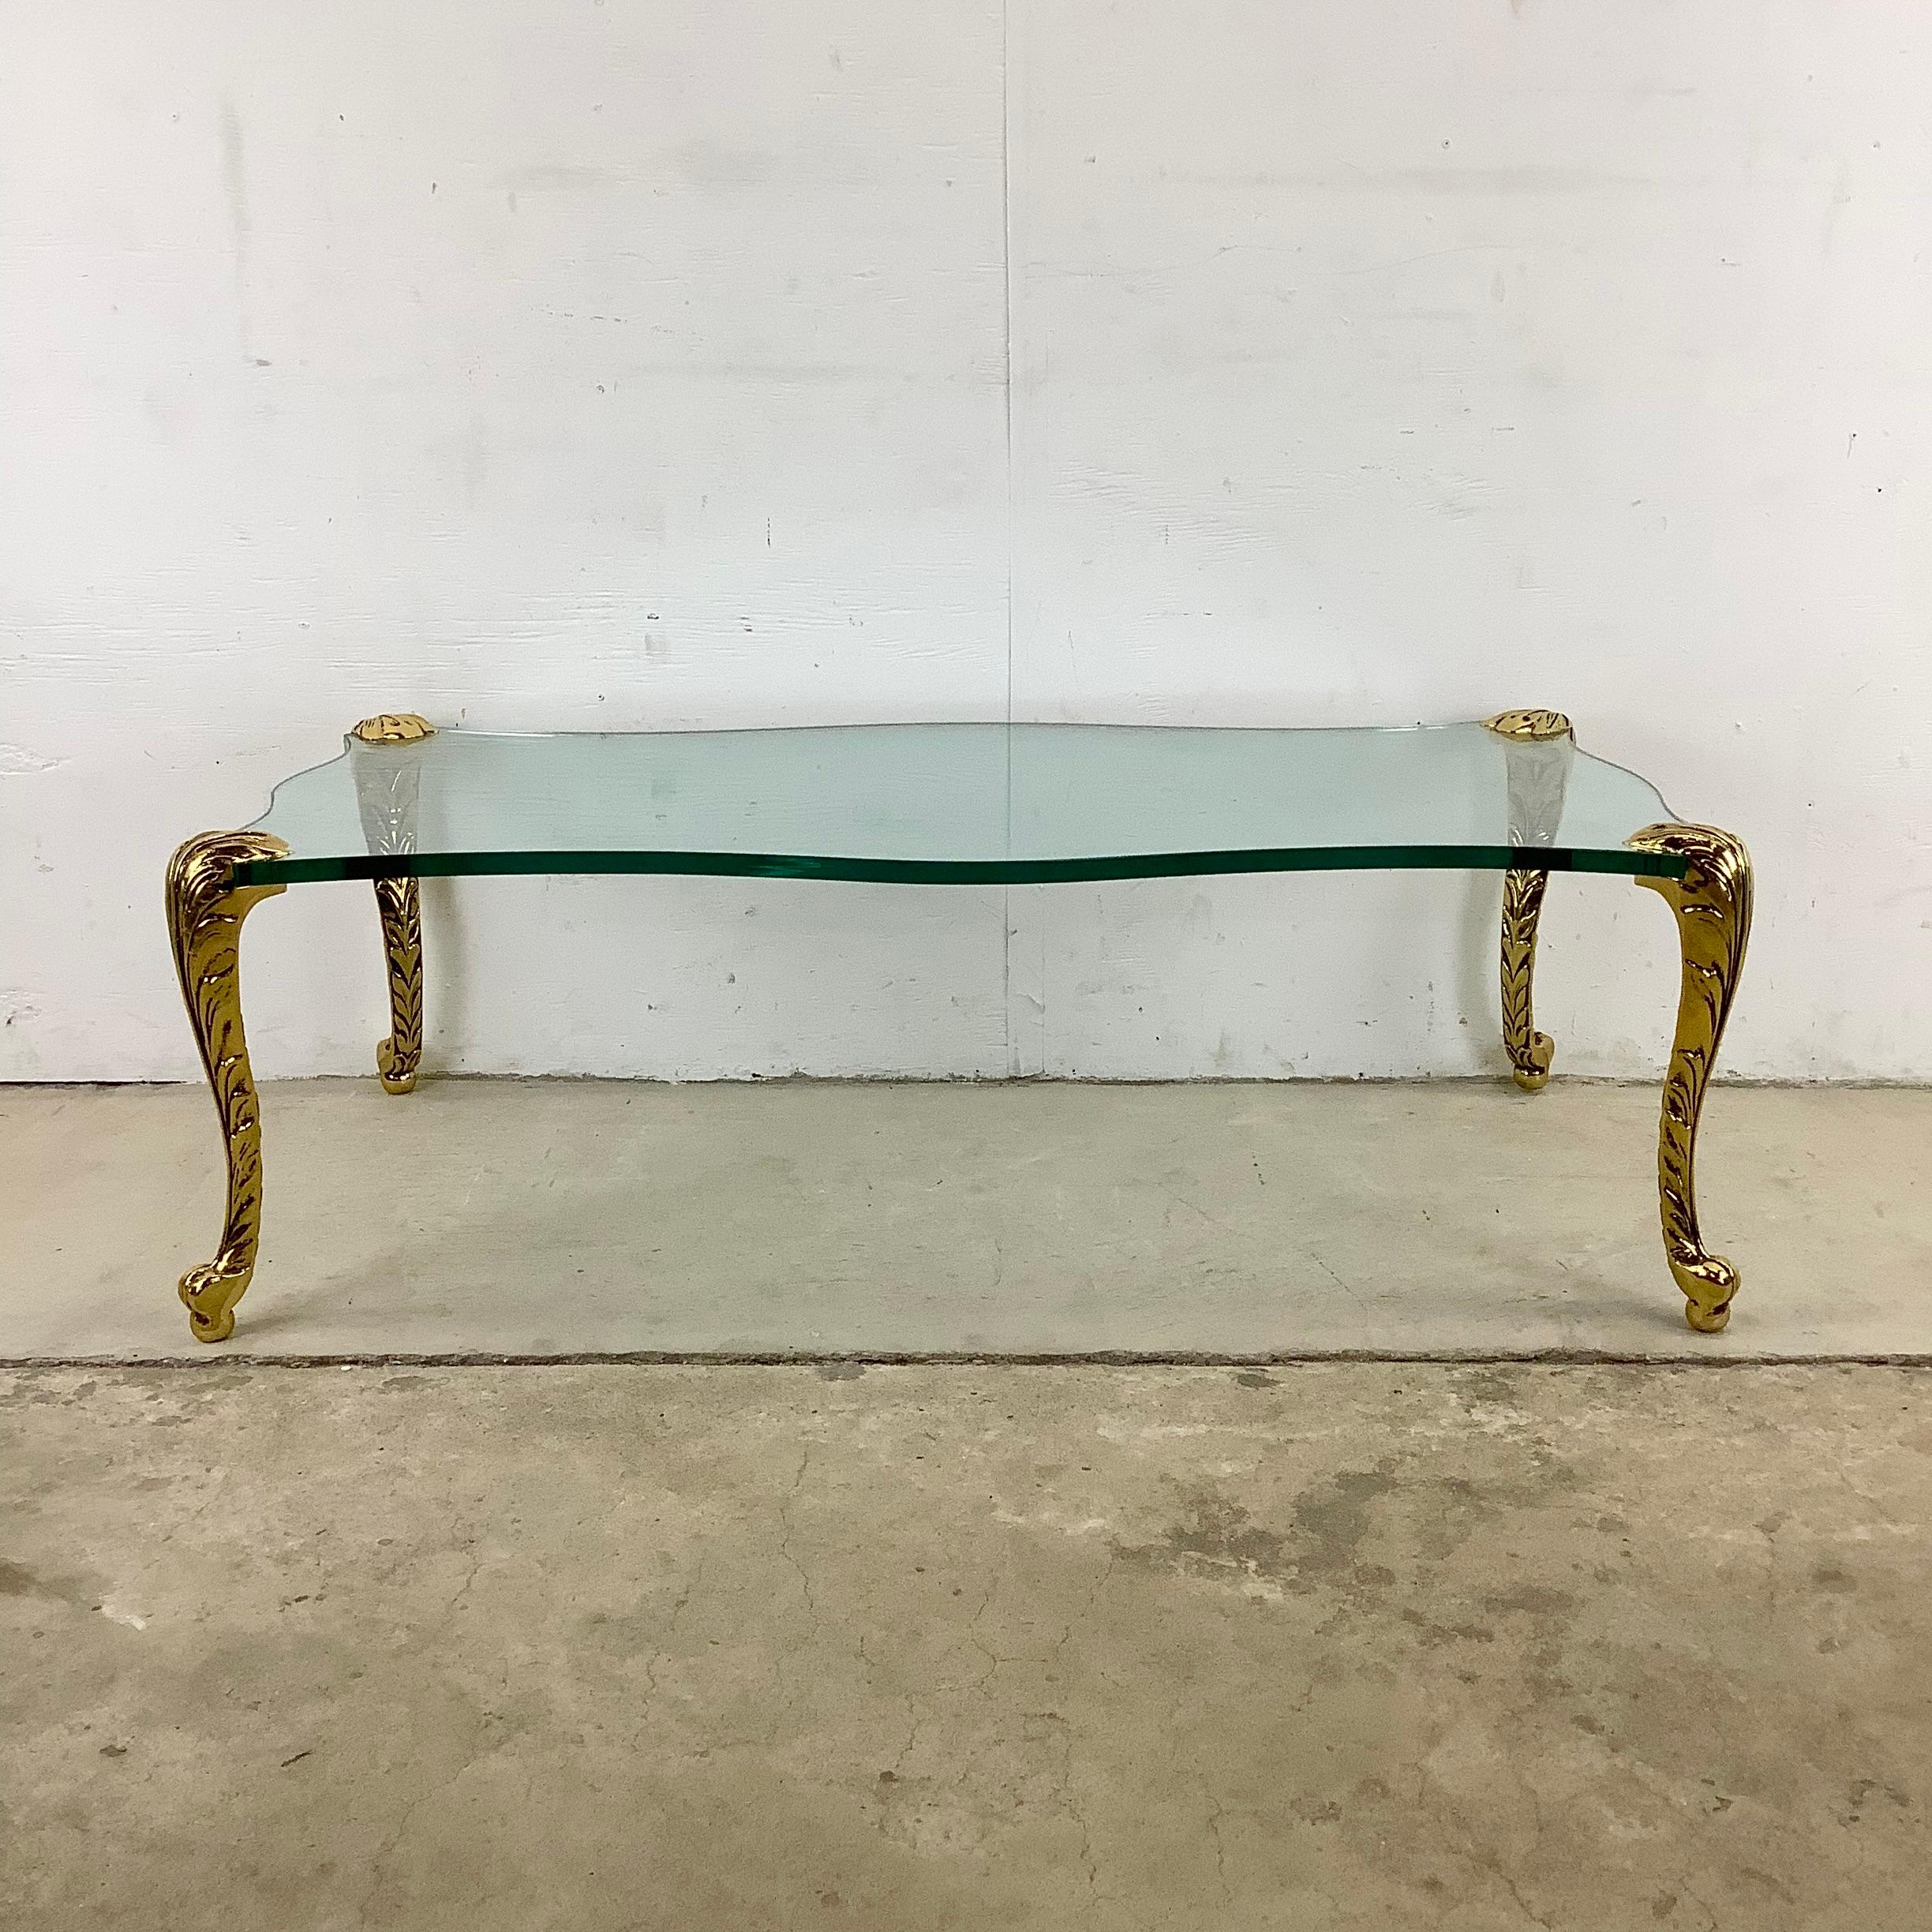 French Provincial Vintage Glass Top and Gilt Leg Coffee Table - P.E. Guerin Style